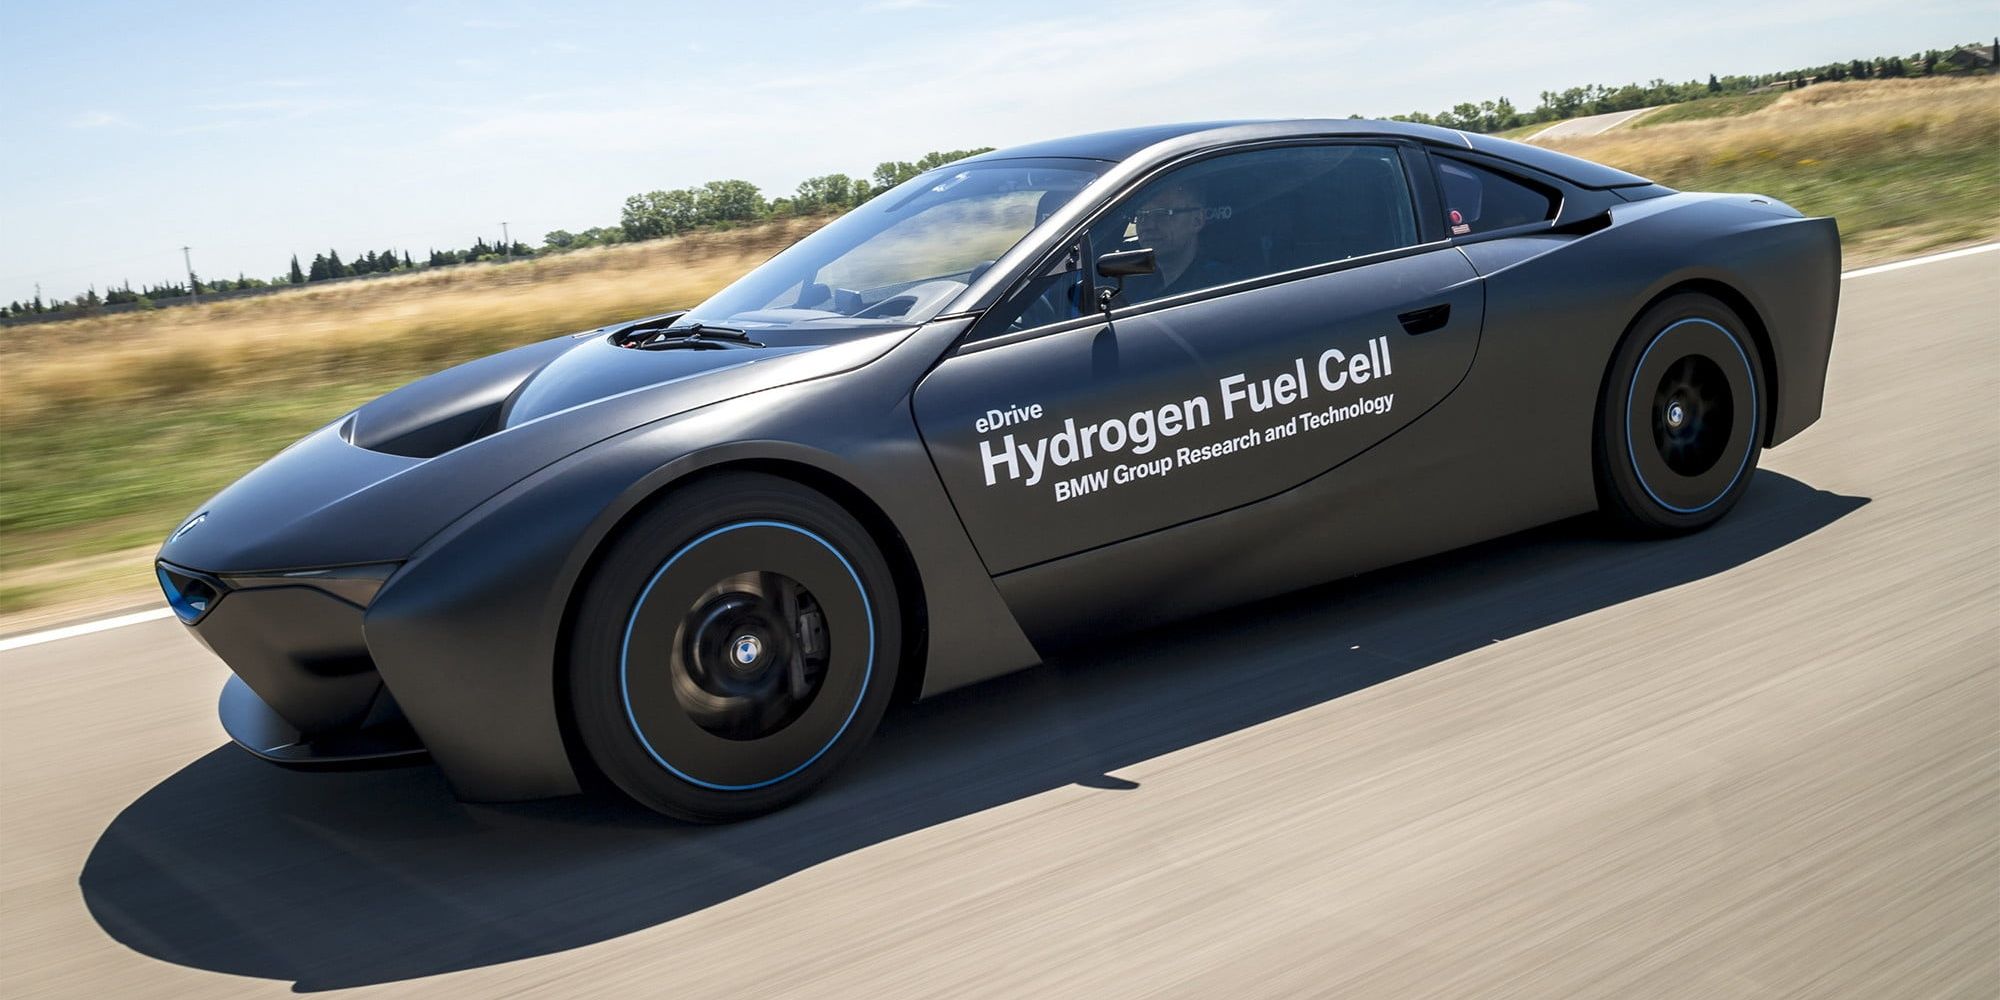 10-things-you-need-to-know-about-hydrogen-fuel-cell-cars